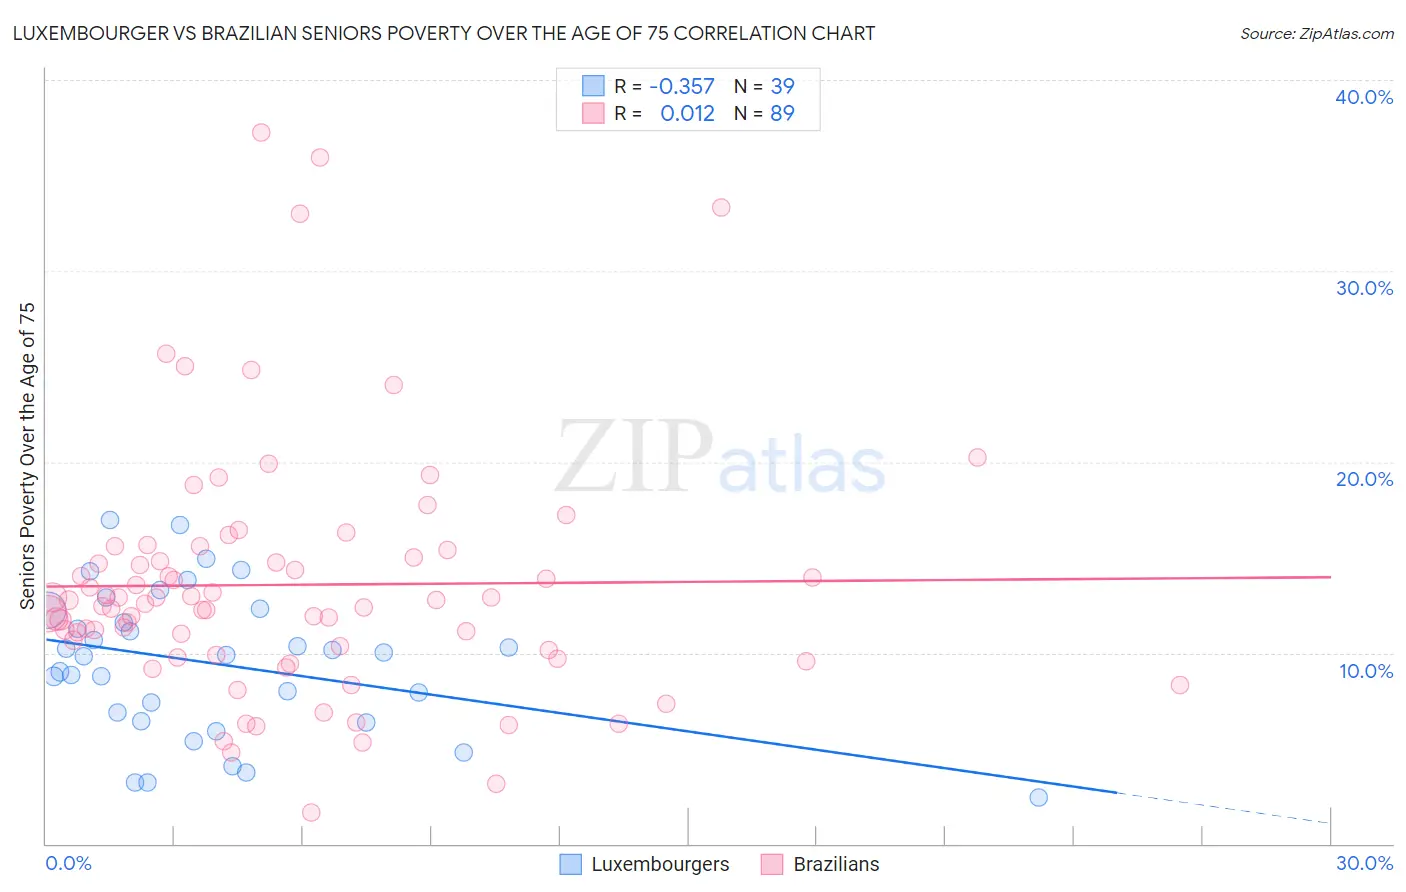 Luxembourger vs Brazilian Seniors Poverty Over the Age of 75